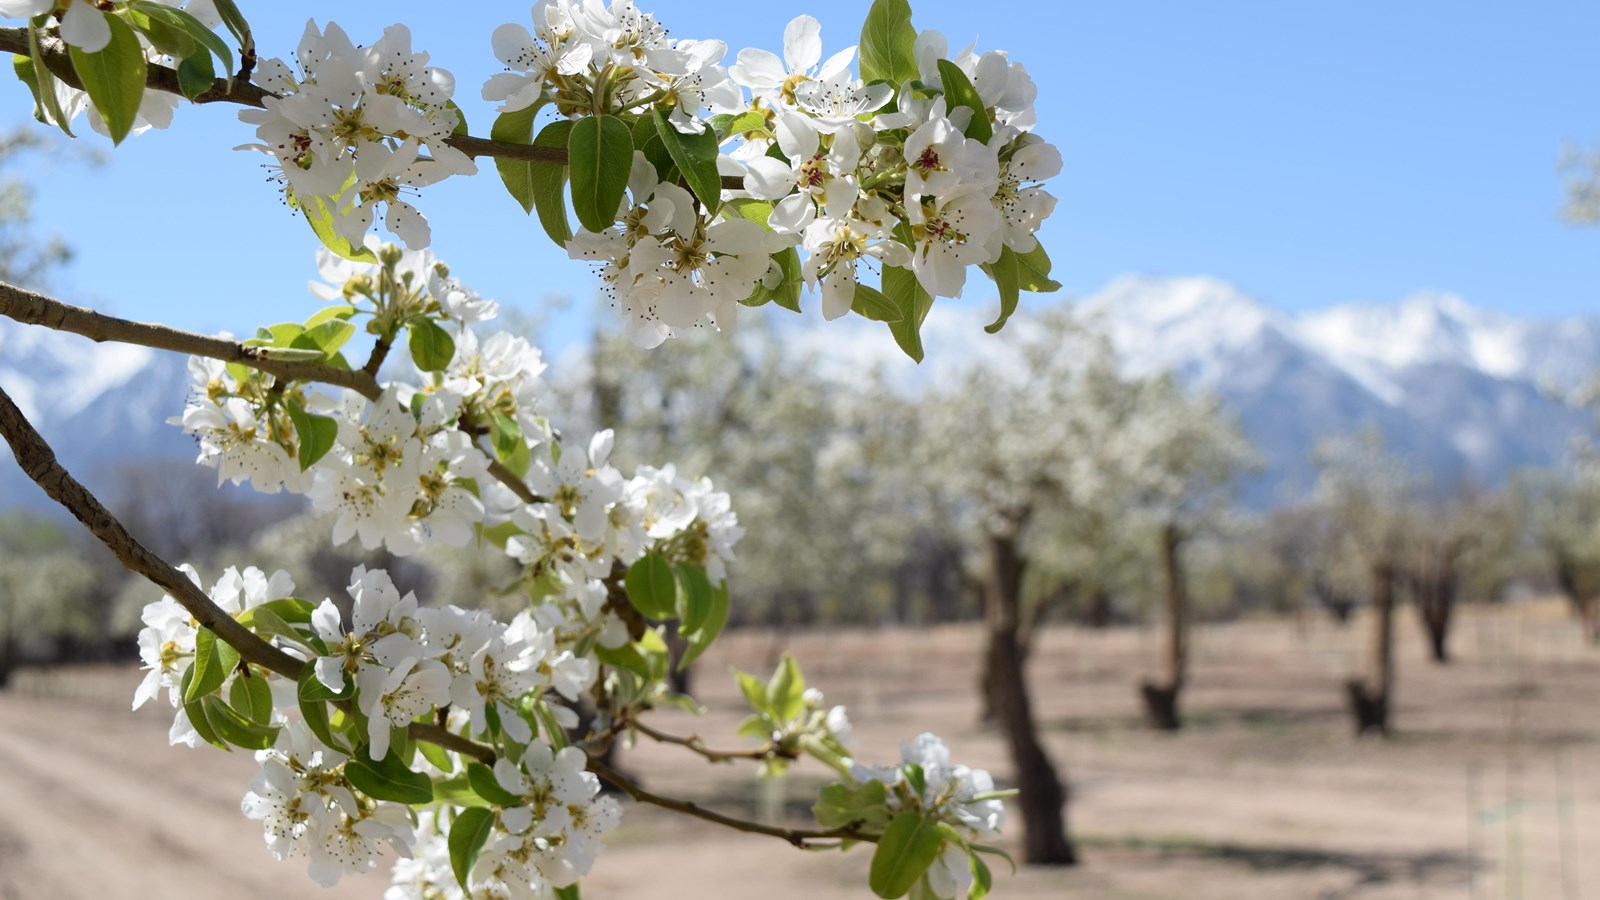 Pear trees with white blossoms